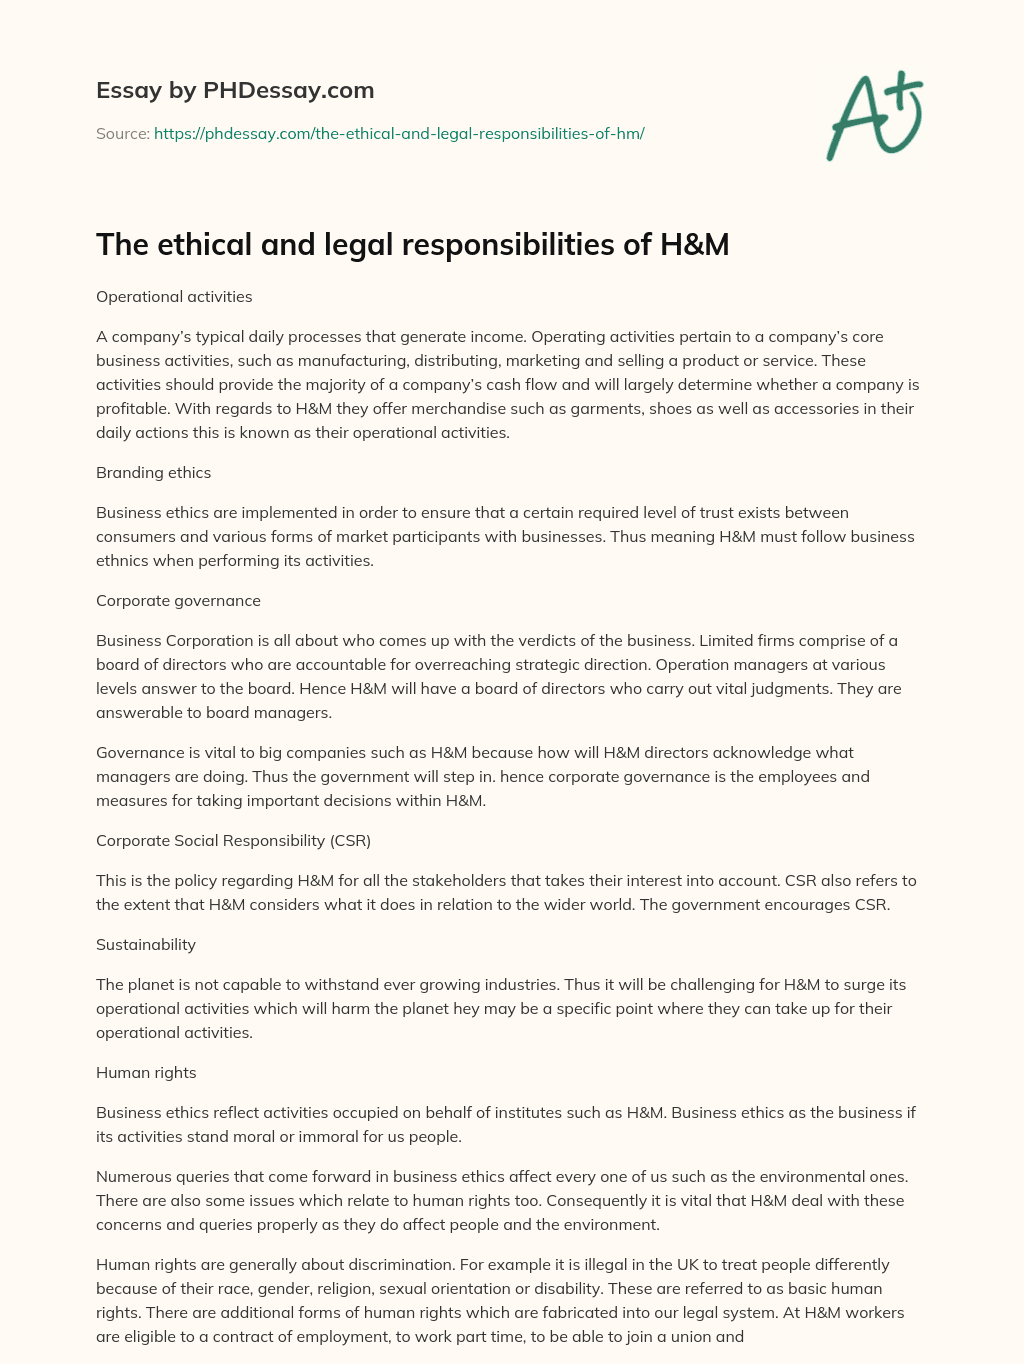 hm case study ethical considerations